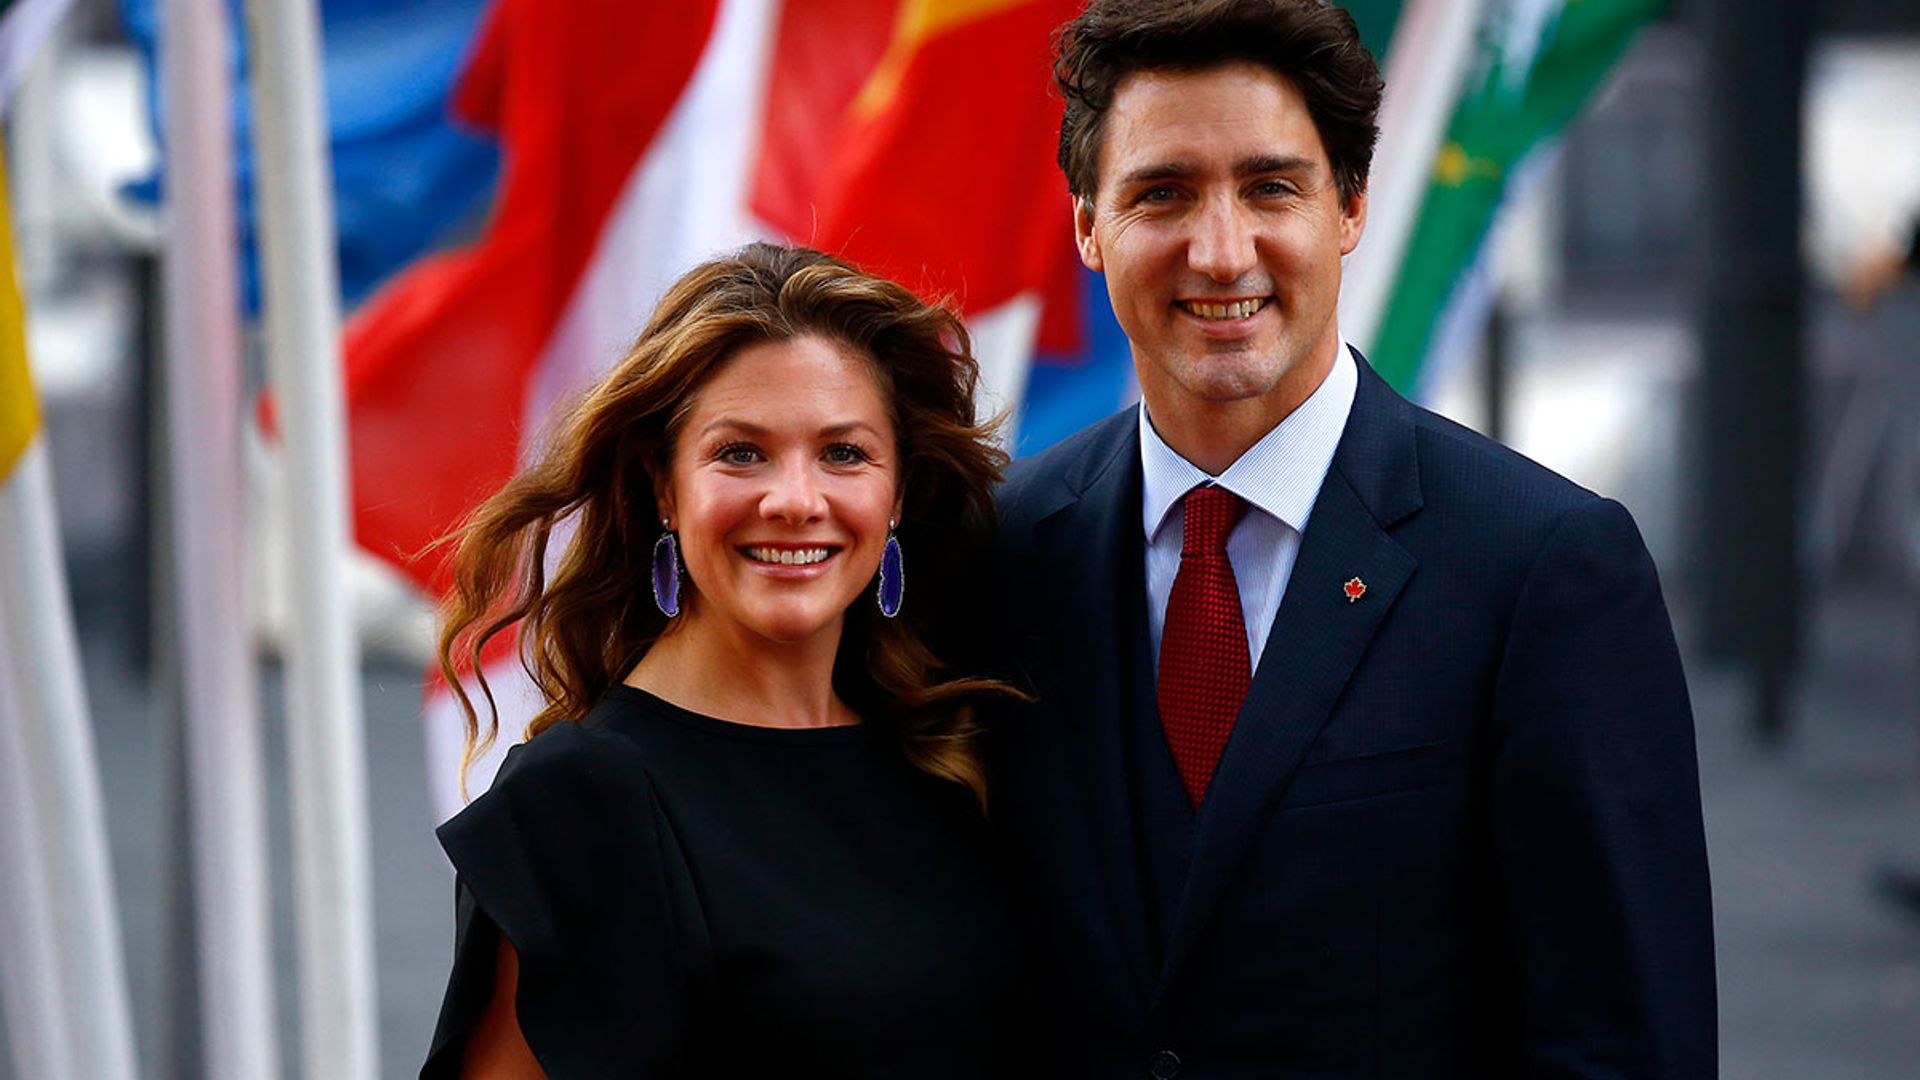 Justin Trudeau's wife tested for coronavirus after visit to London